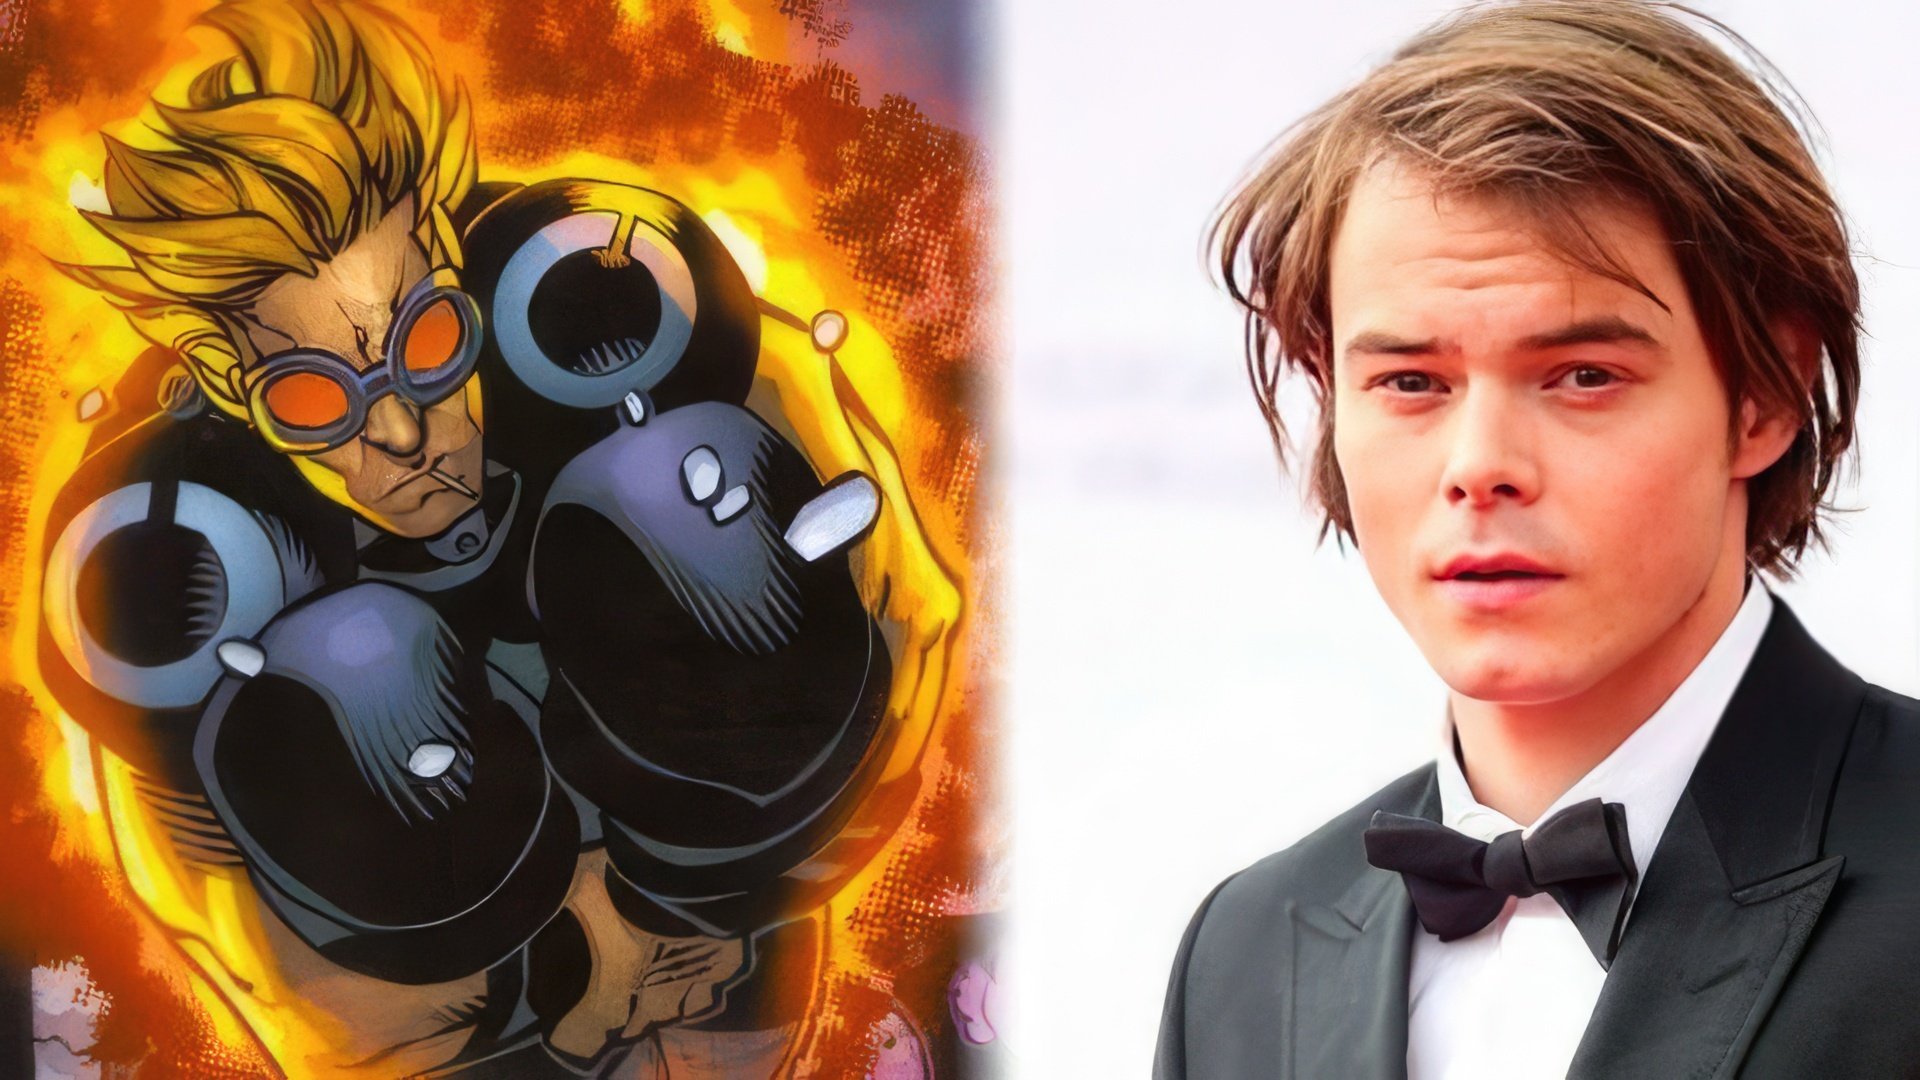 In 'The New Mutants', Charlie Heaton played the mutant Cannonball